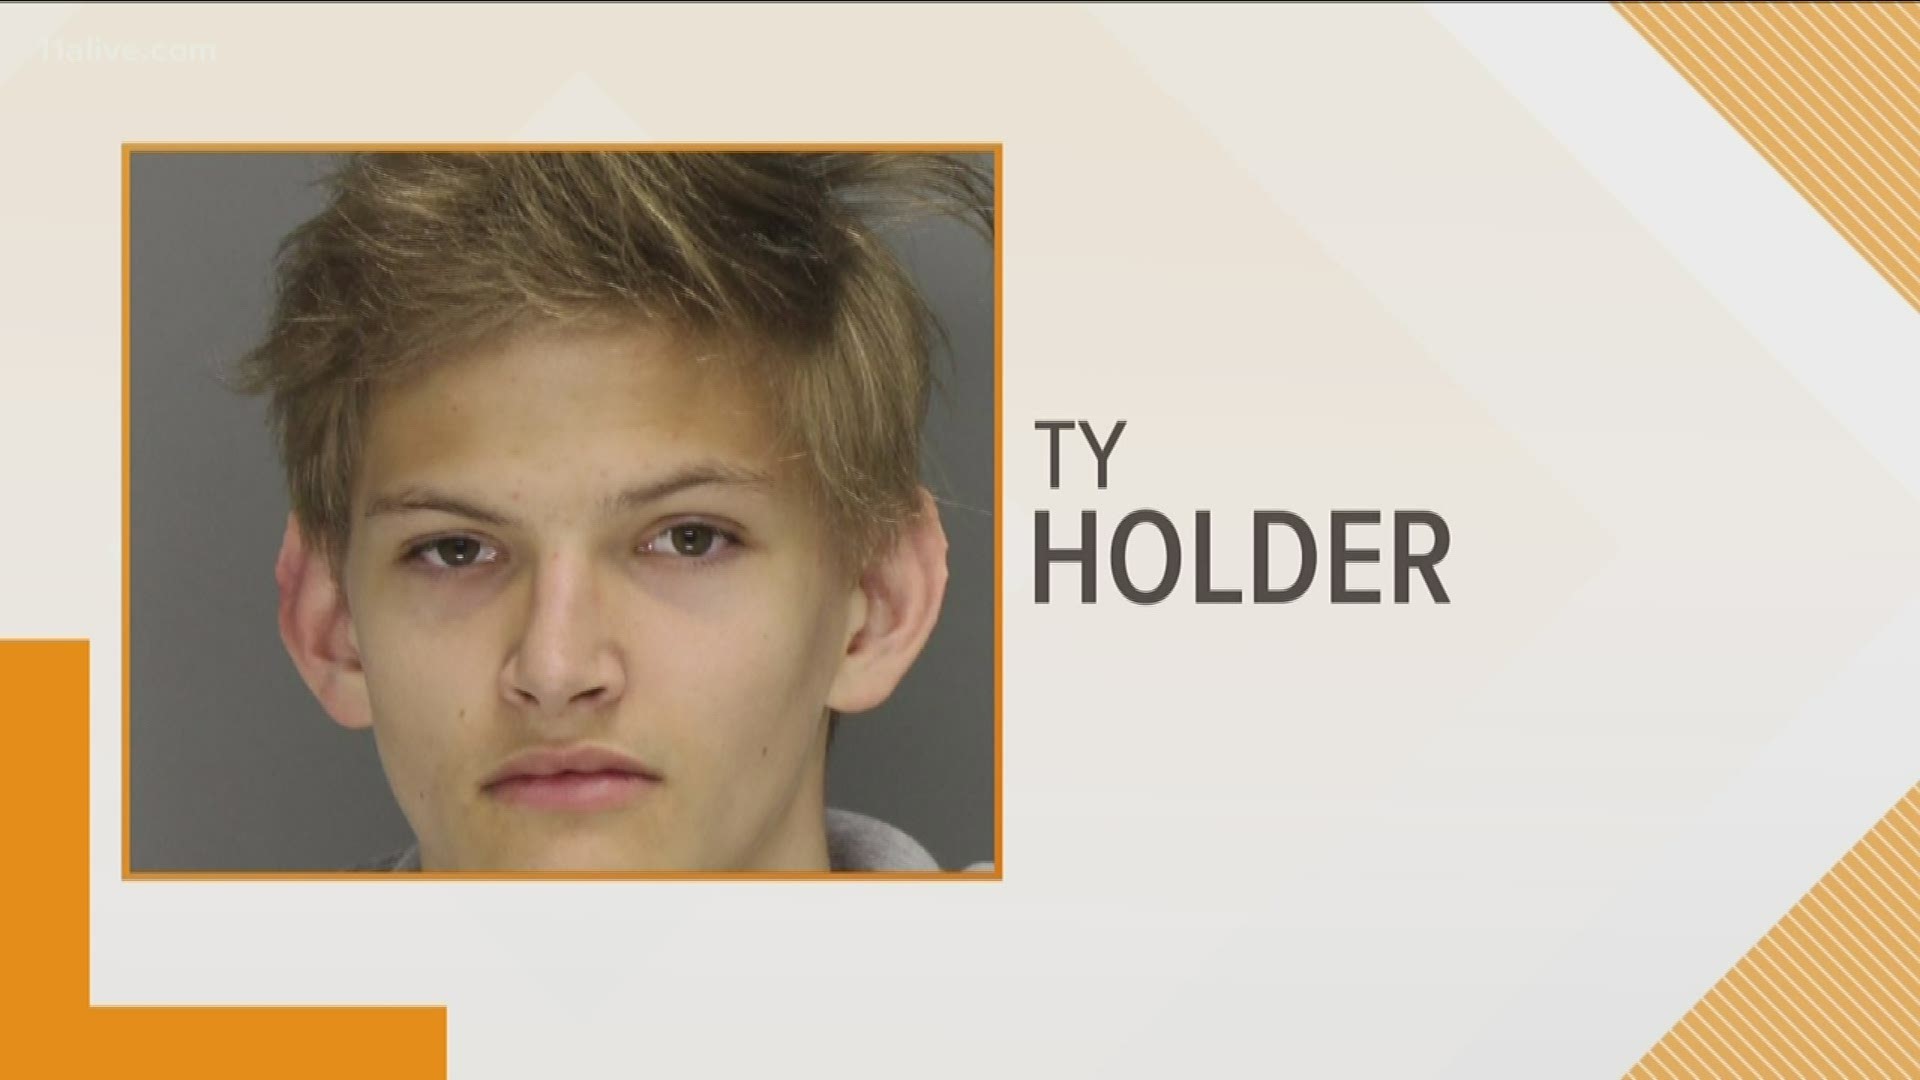 Ty Holder, 17, faces two felony charges for the attack and additional threats made against Walton High School.